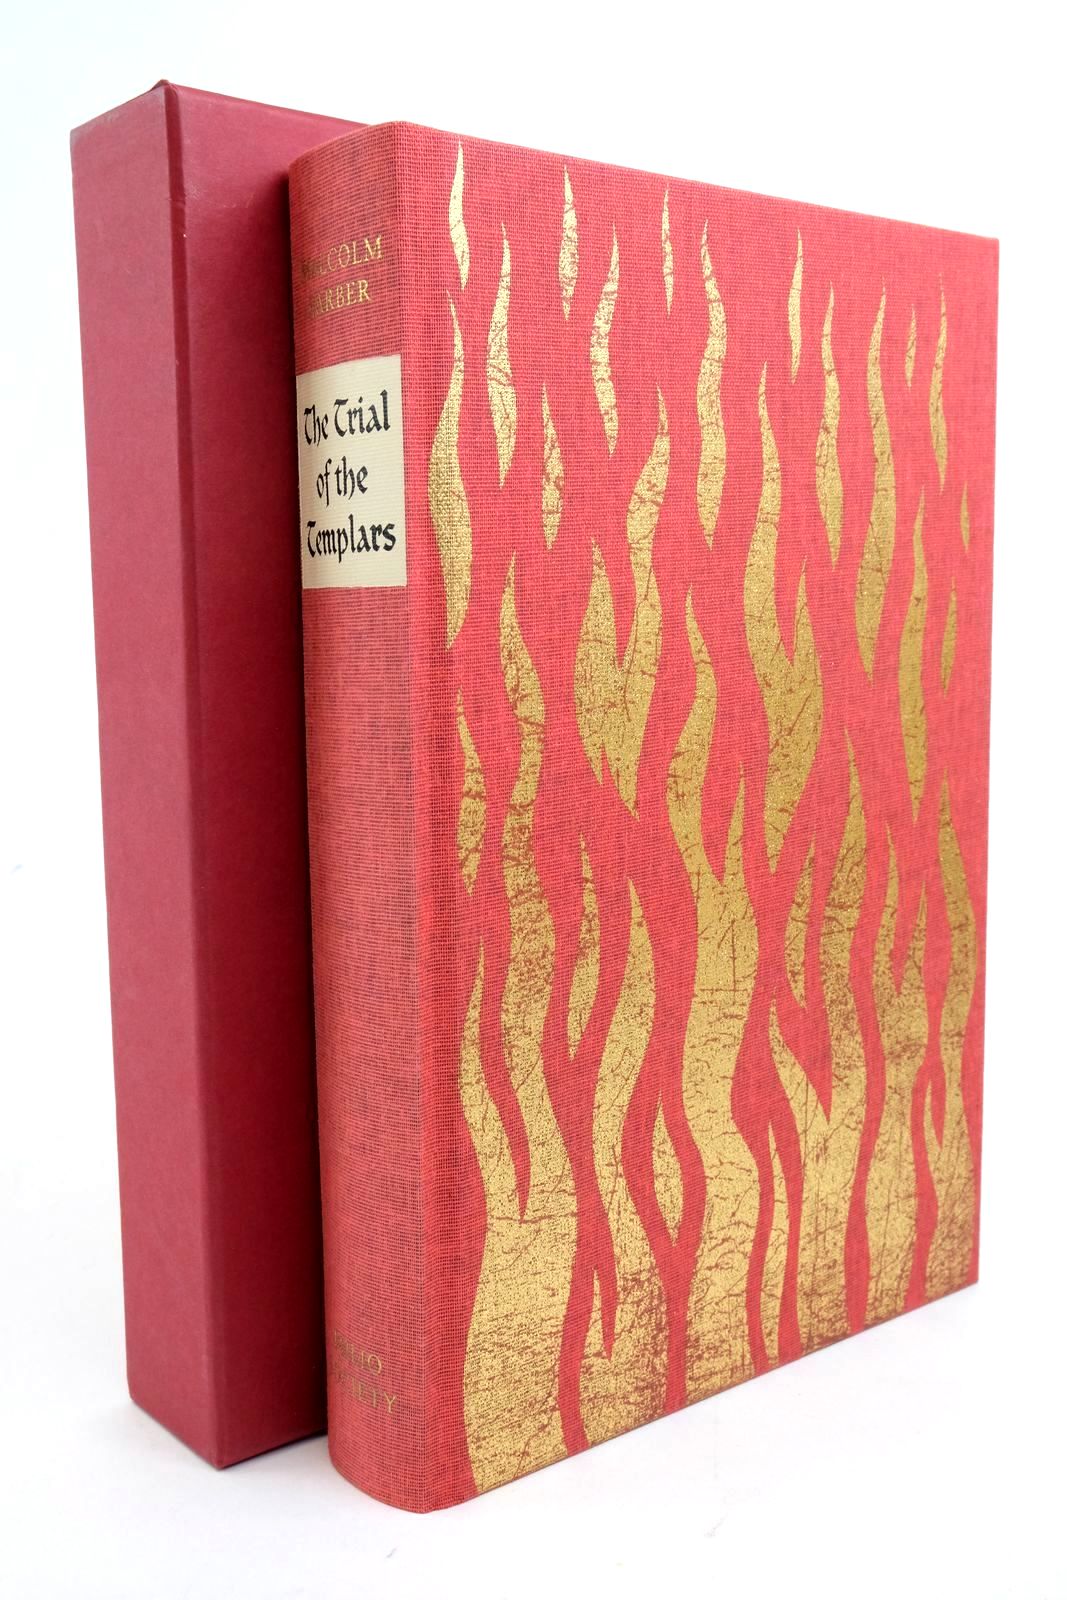 Photo of THE TRIAL OF THE TEMPLARS written by Barber, Malcolm published by Folio Society (STOCK CODE: 1322370)  for sale by Stella & Rose's Books